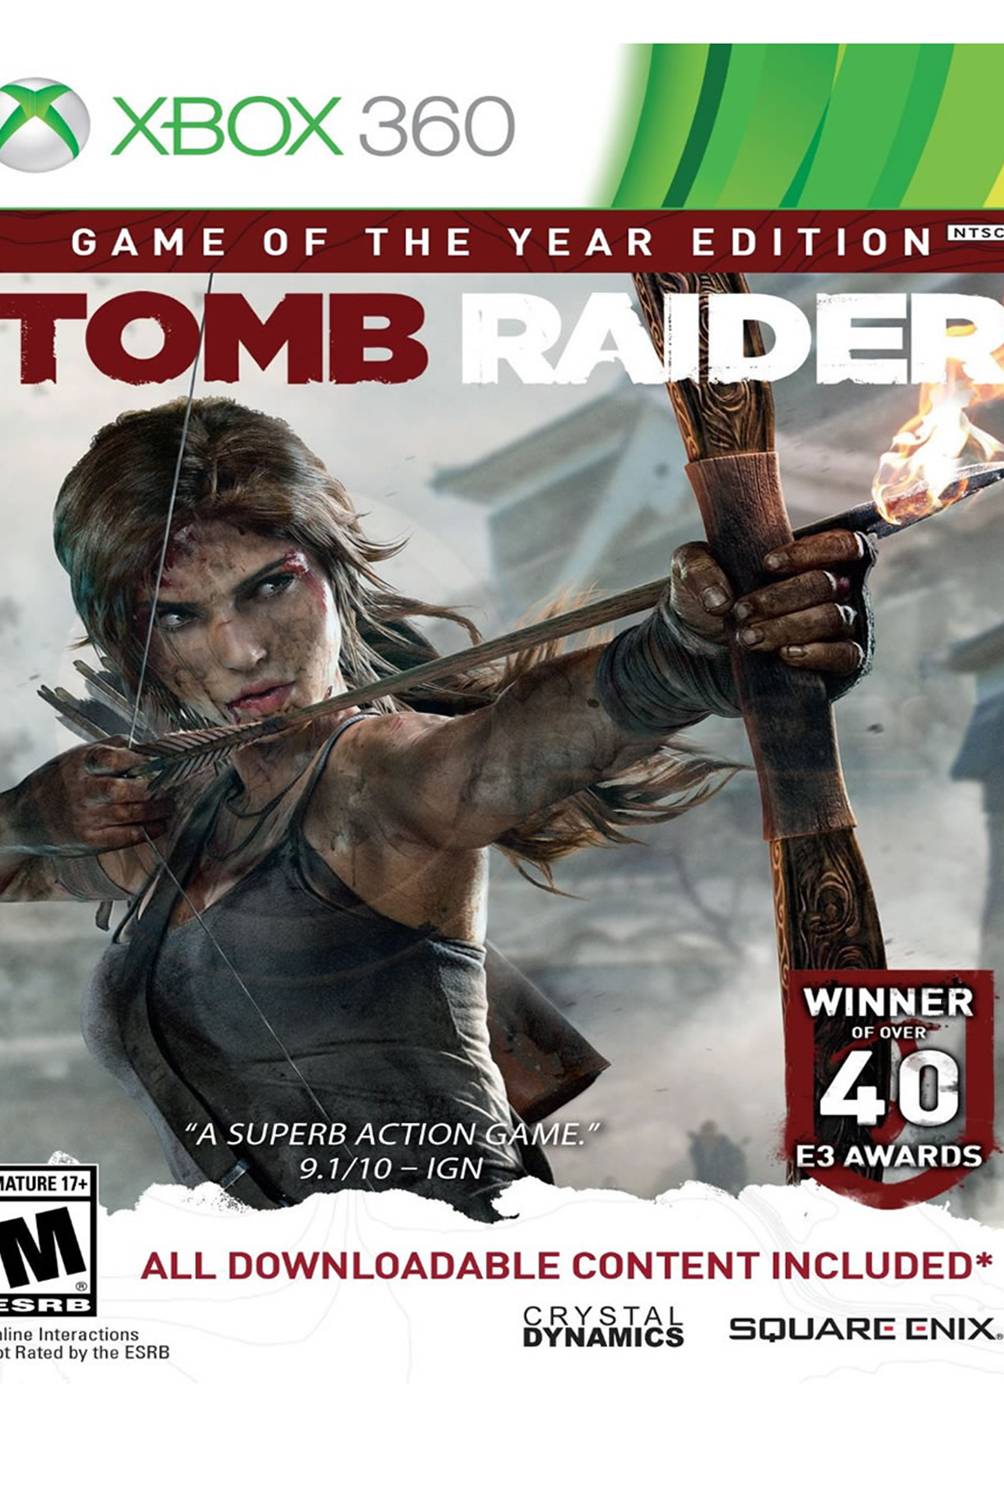 Square Enix - Tomb Raider Game of the Year Xbox 360